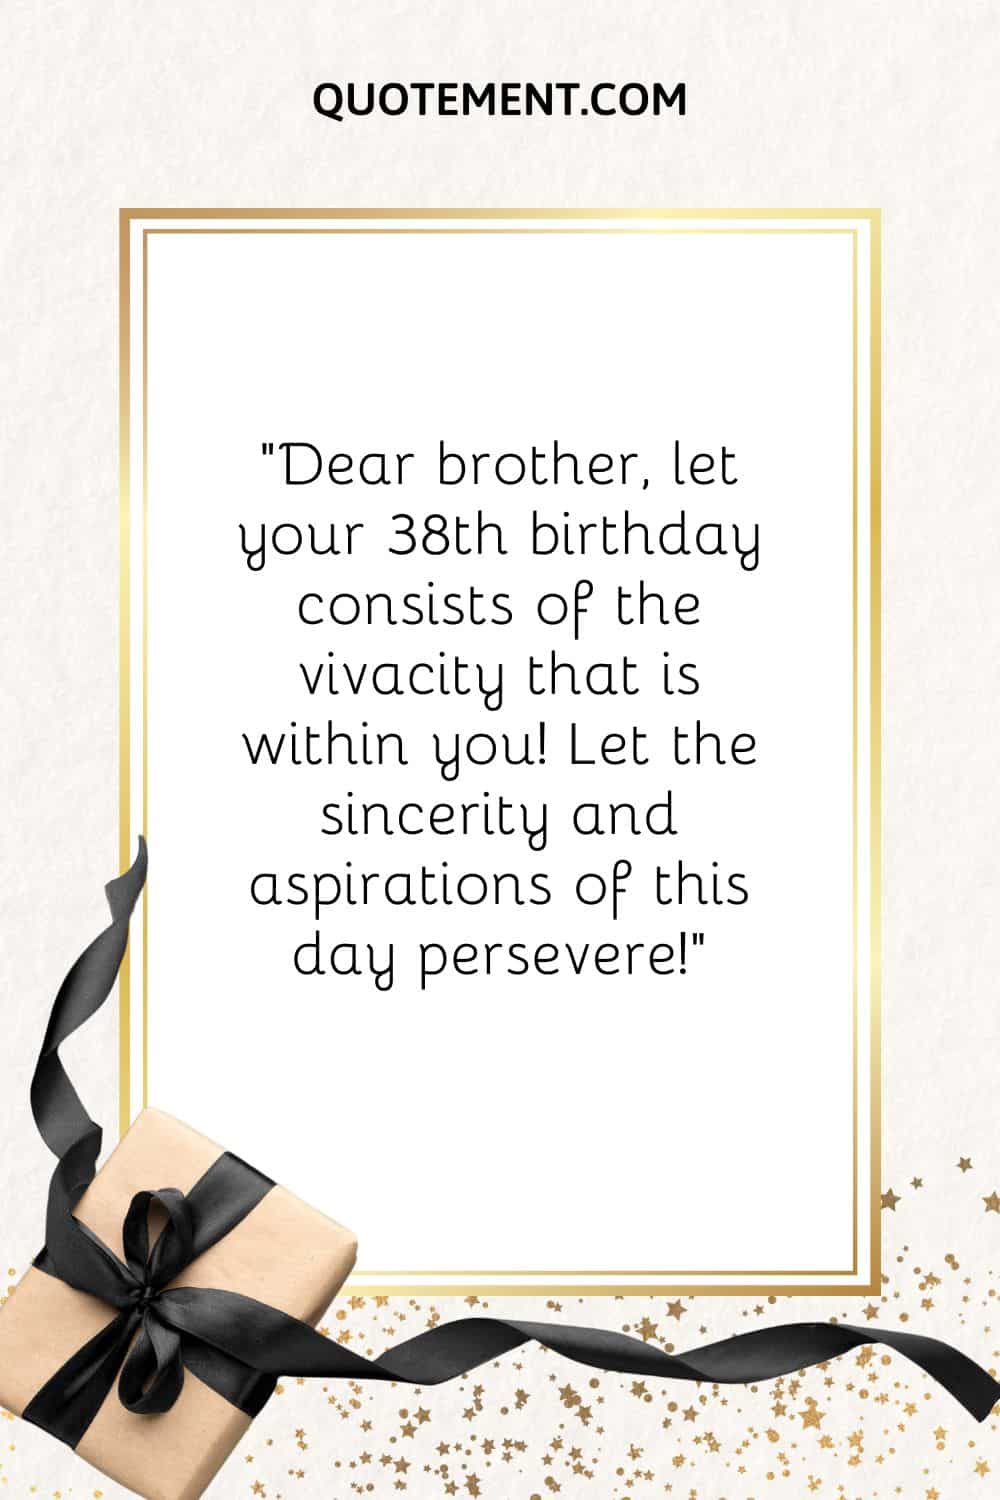 Dear brother, let your 38th birthday consists of the vivacity that is within you